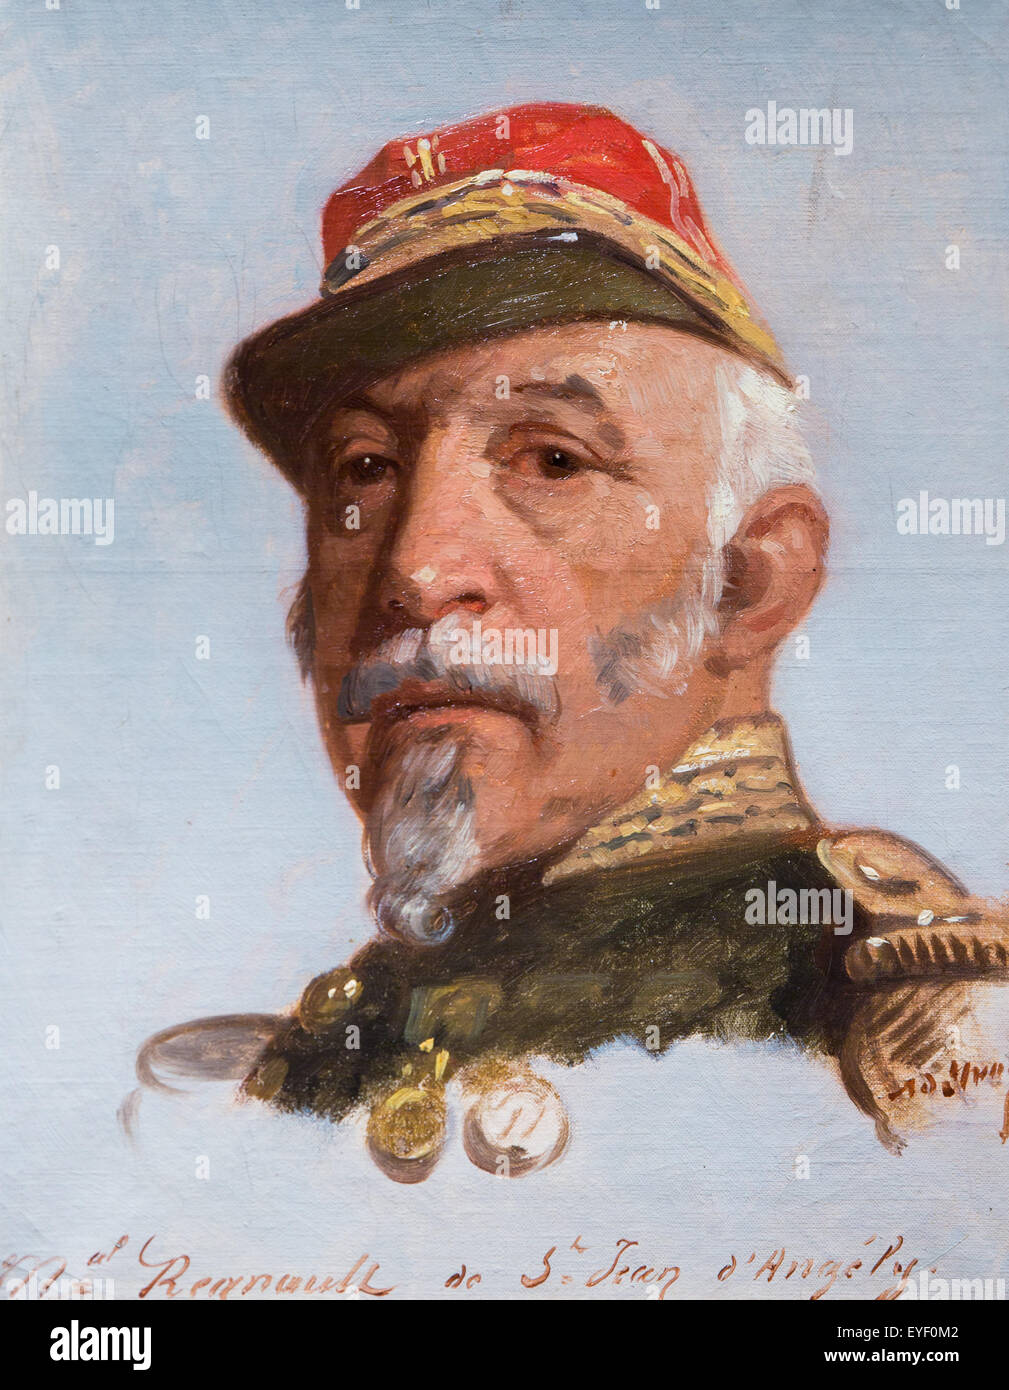 The Marshal Auguste Regnault of St-Jean of Angely 07/12/2013 - 19th century Collection Stock Photo